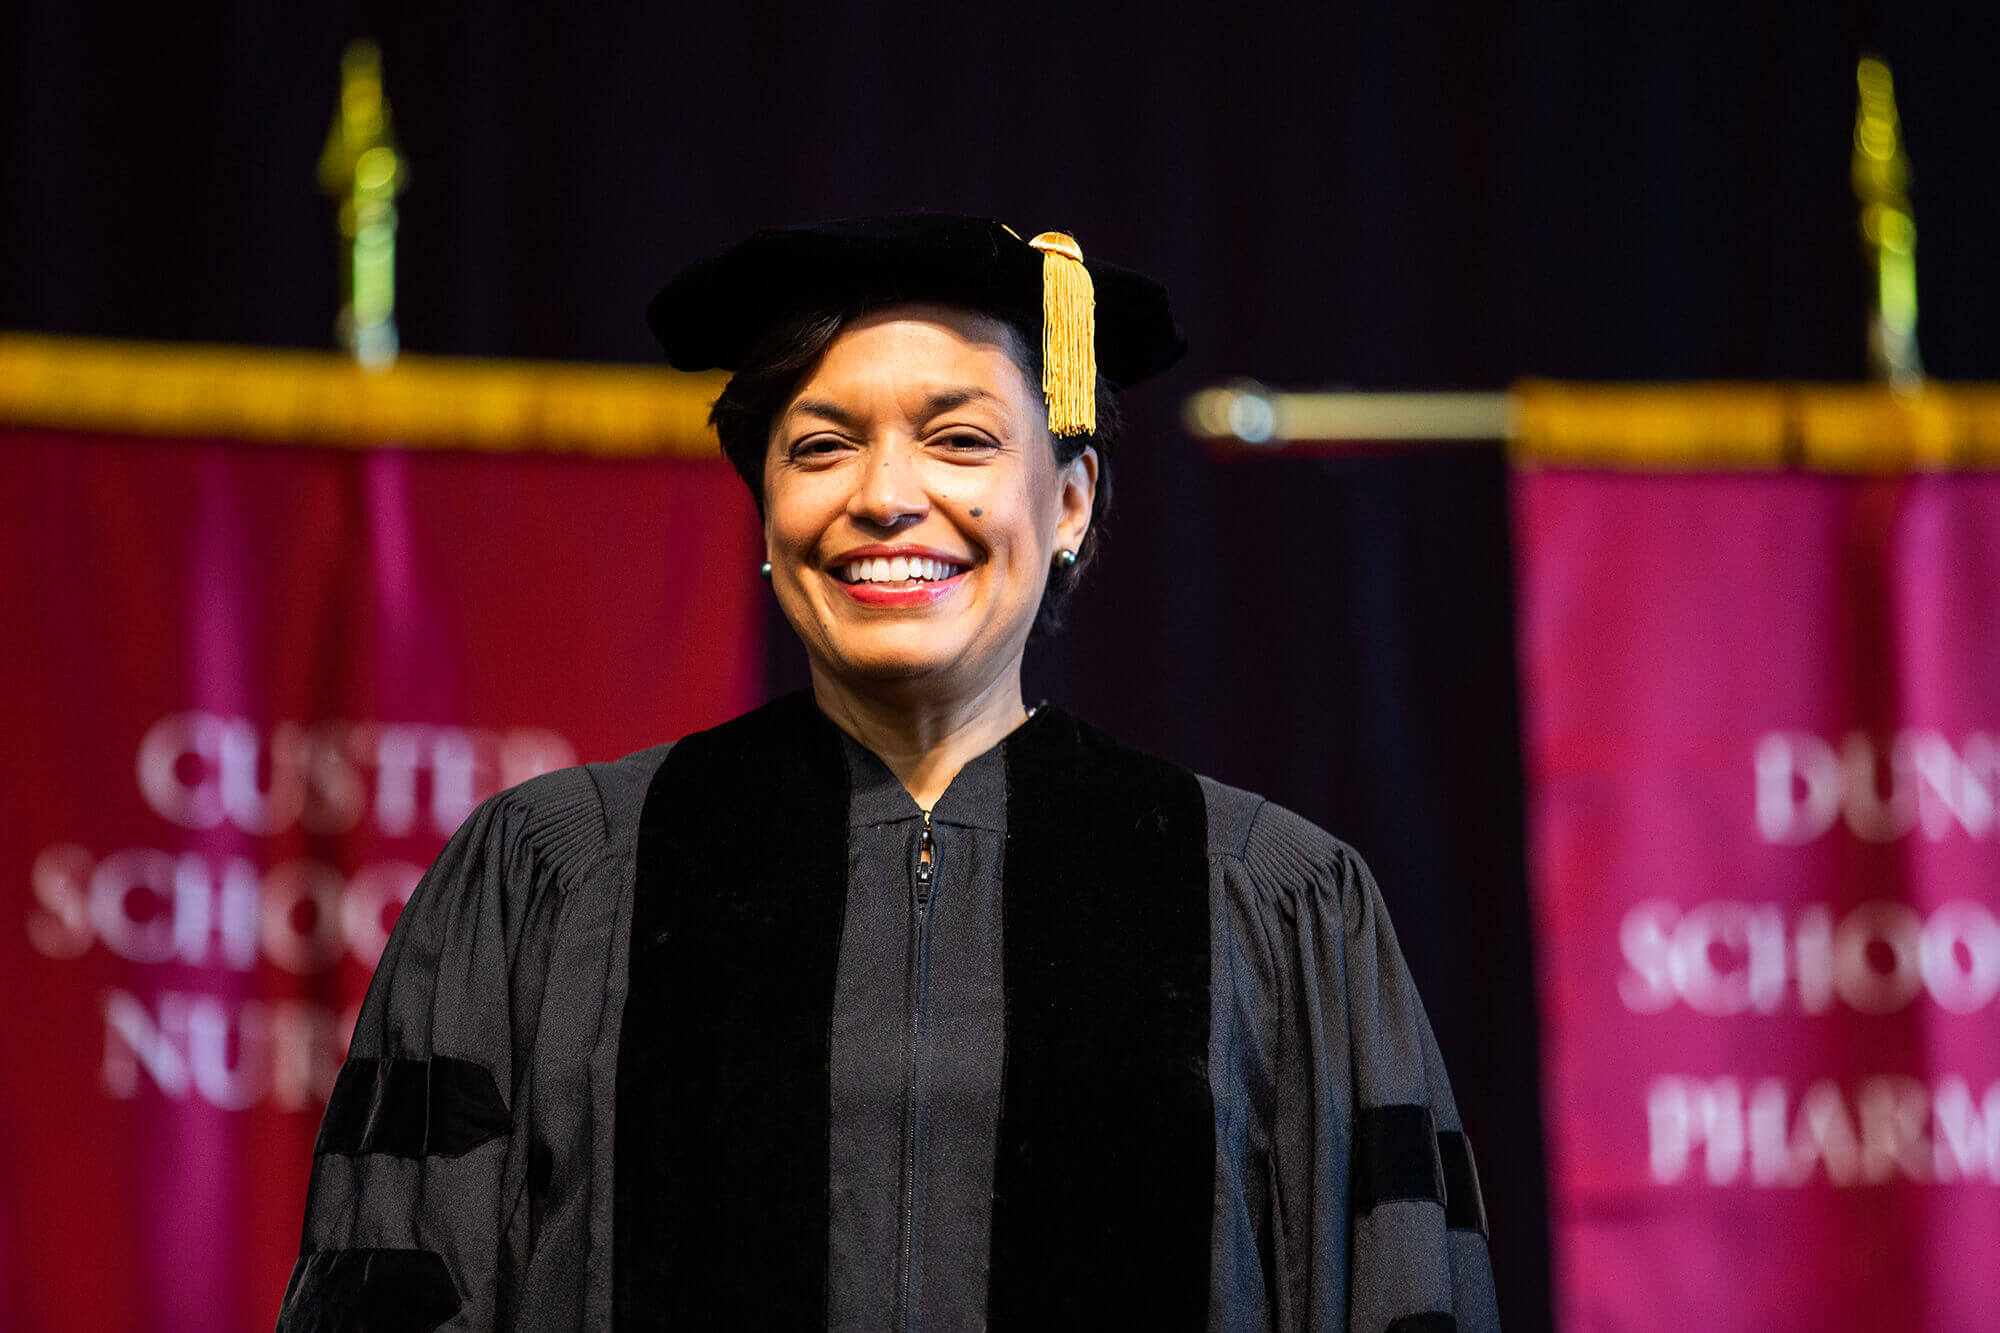 Think deeply. Plan carefully. Act courageously. 2019 honorary degree recipient Bonnie St. John models and inspires a life of resilience.